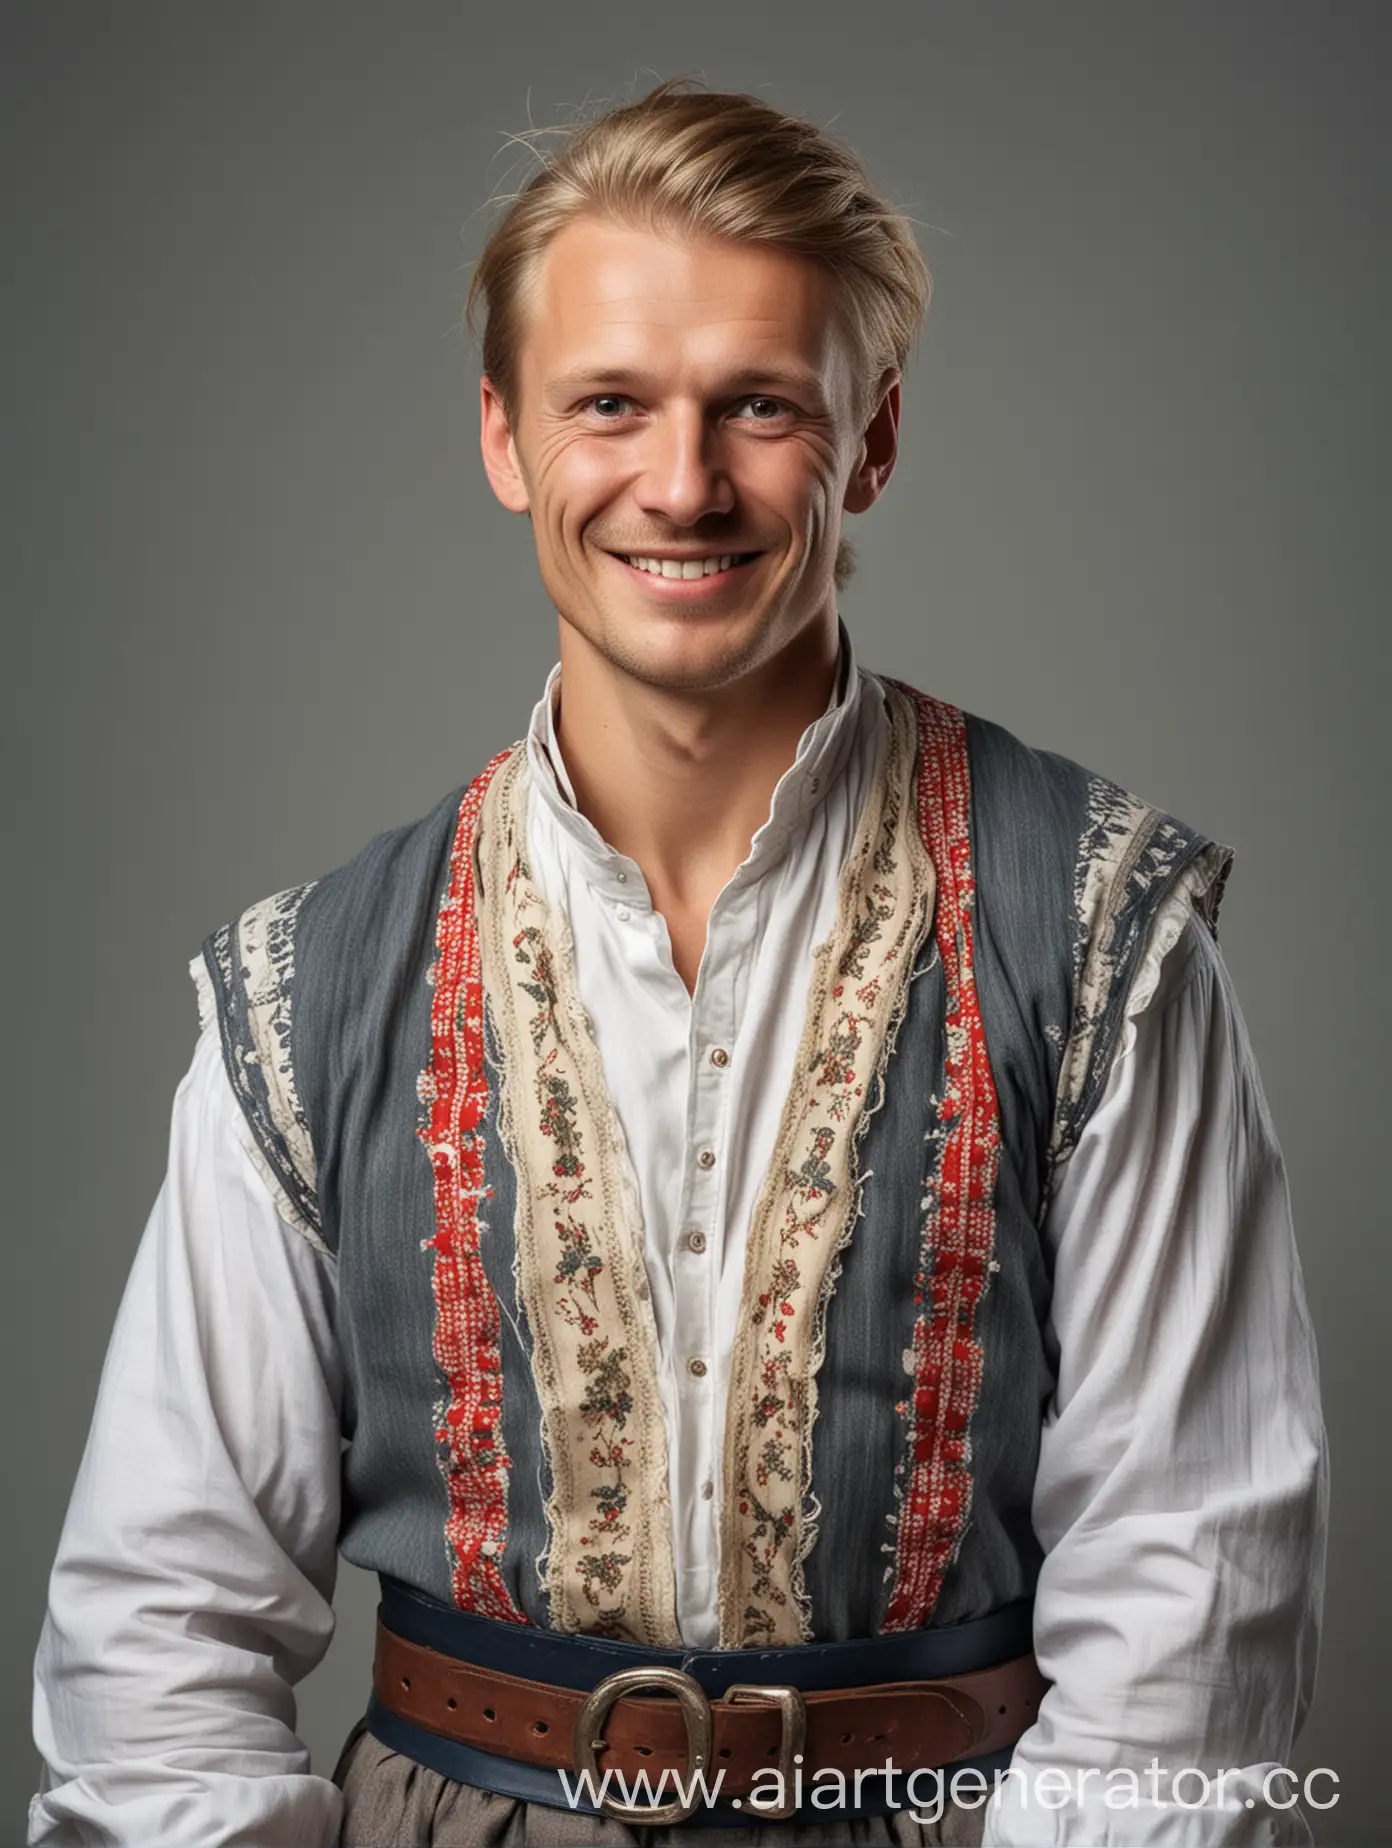 Scandinavian-Man-in-Traditional-Attire-Smiling-Happily